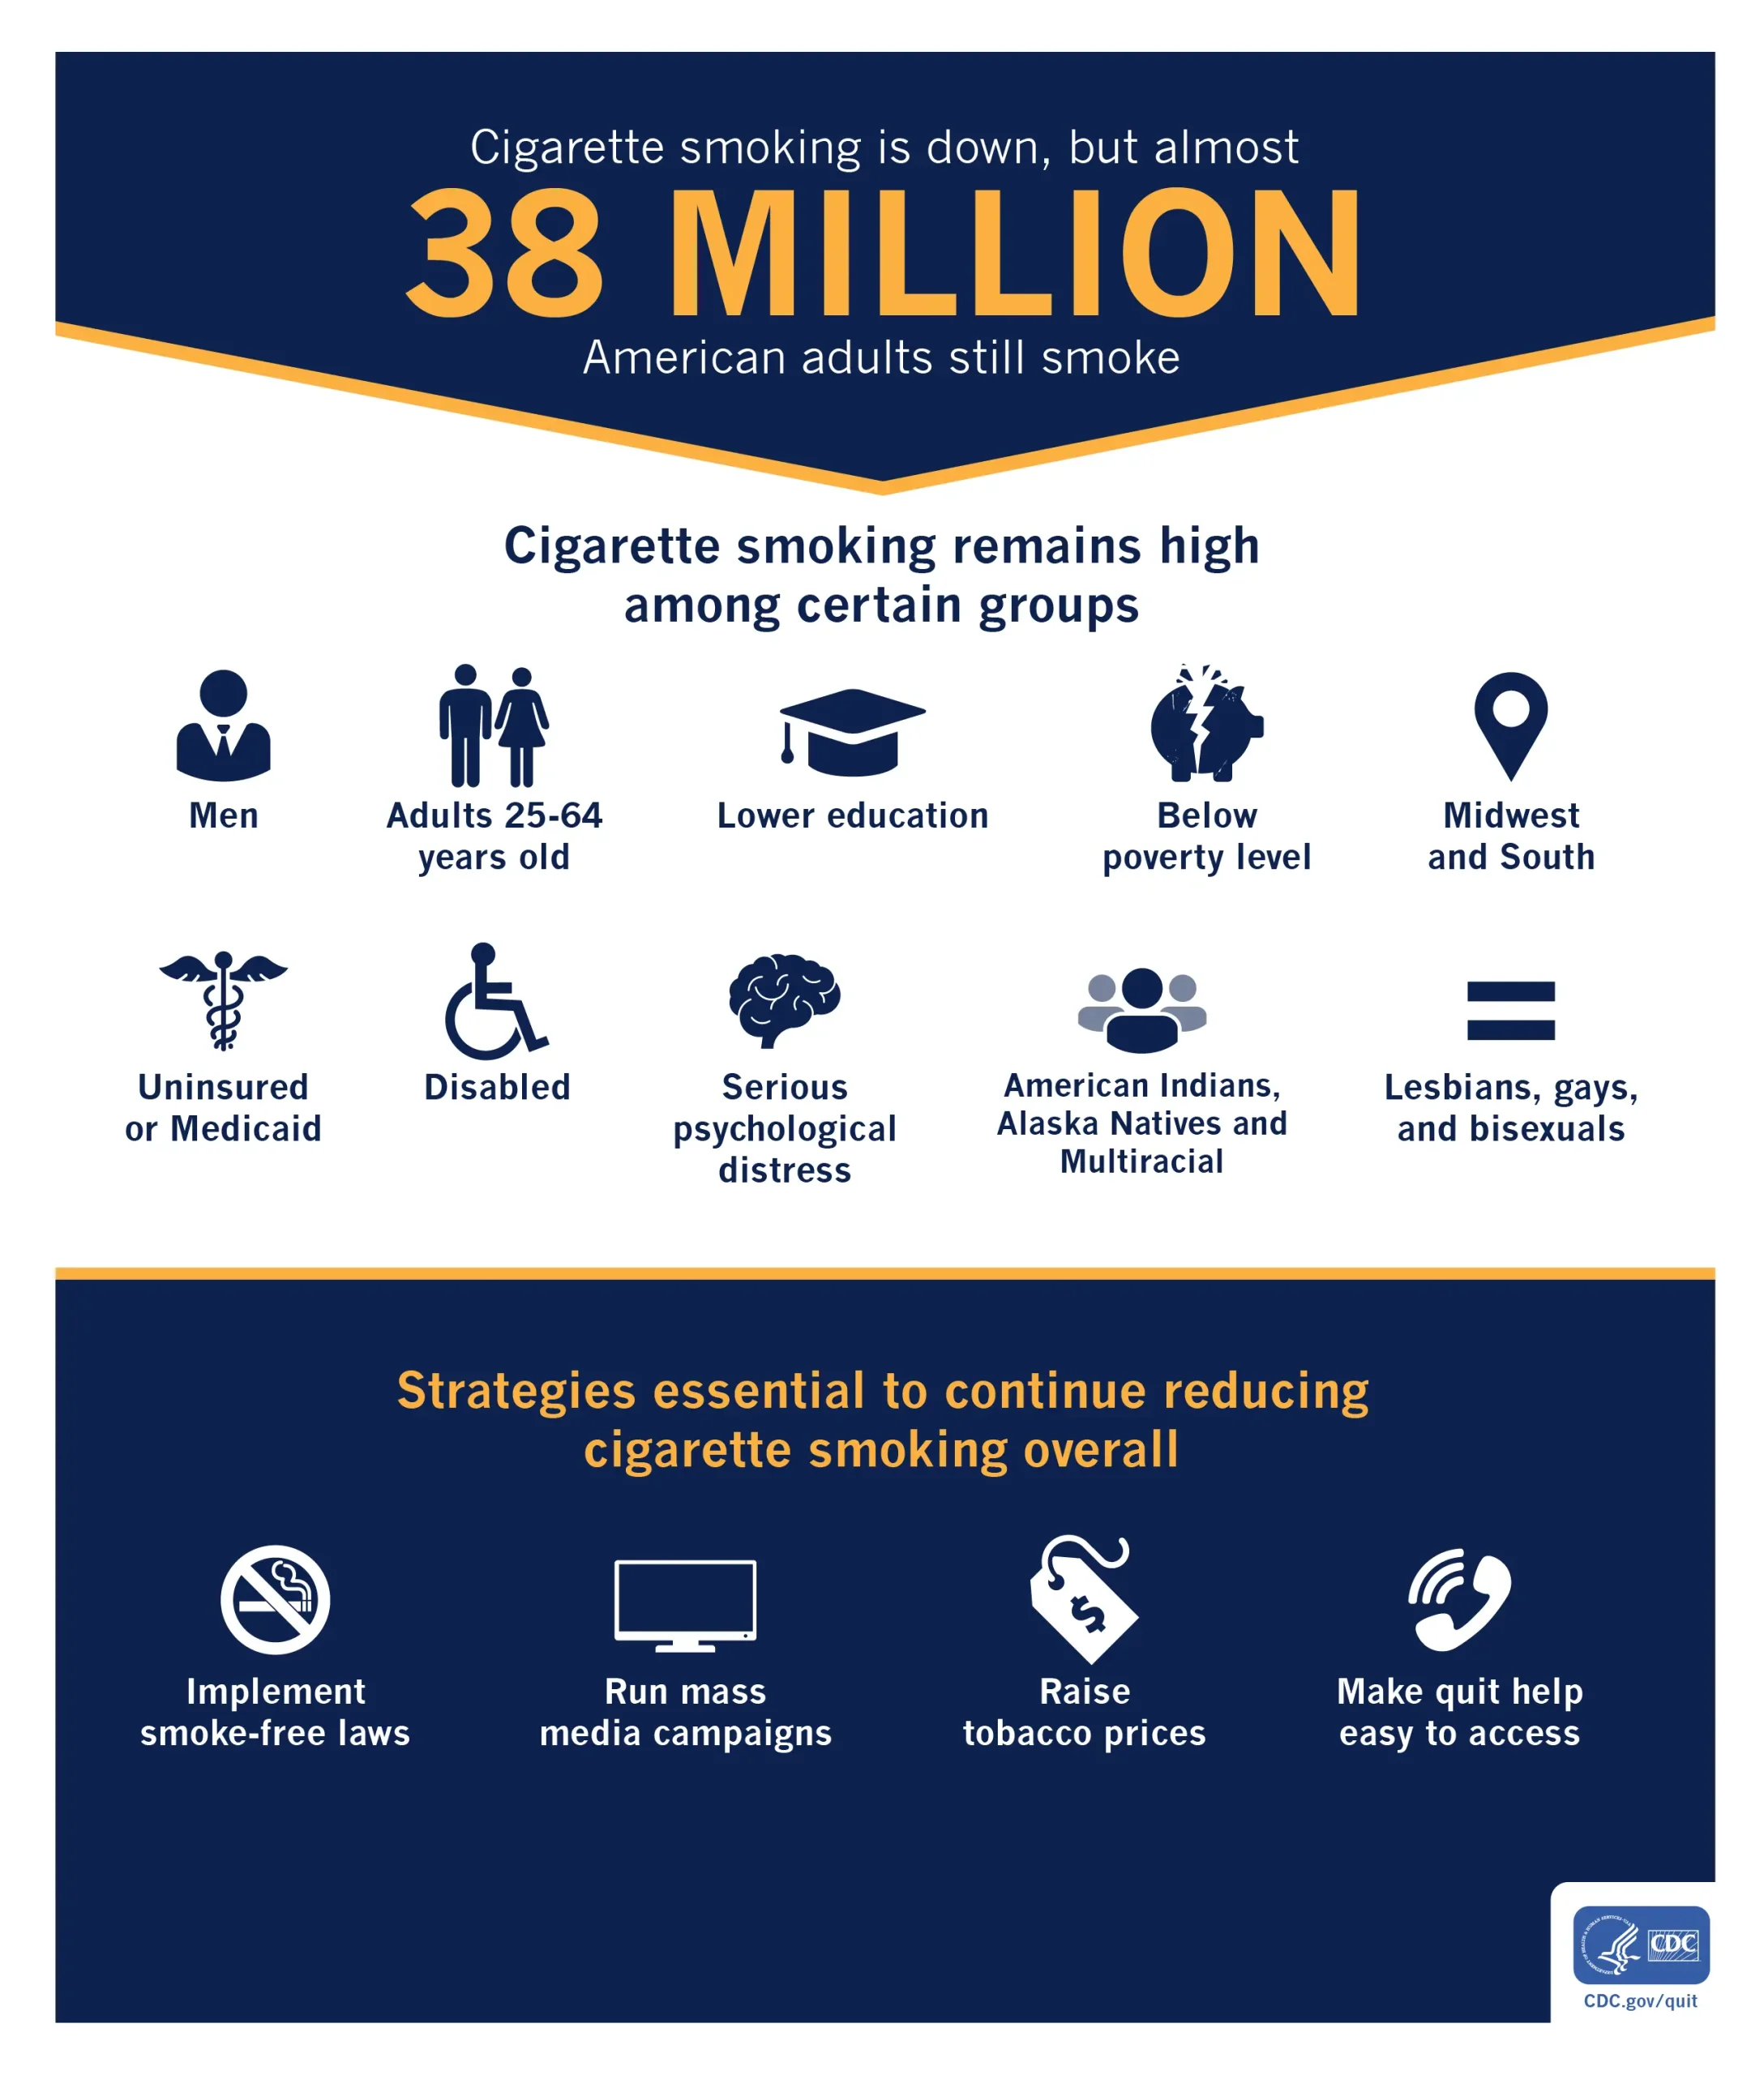 how many cigarettes are smoked every day - Is smoking 1 cigarette a day addiction